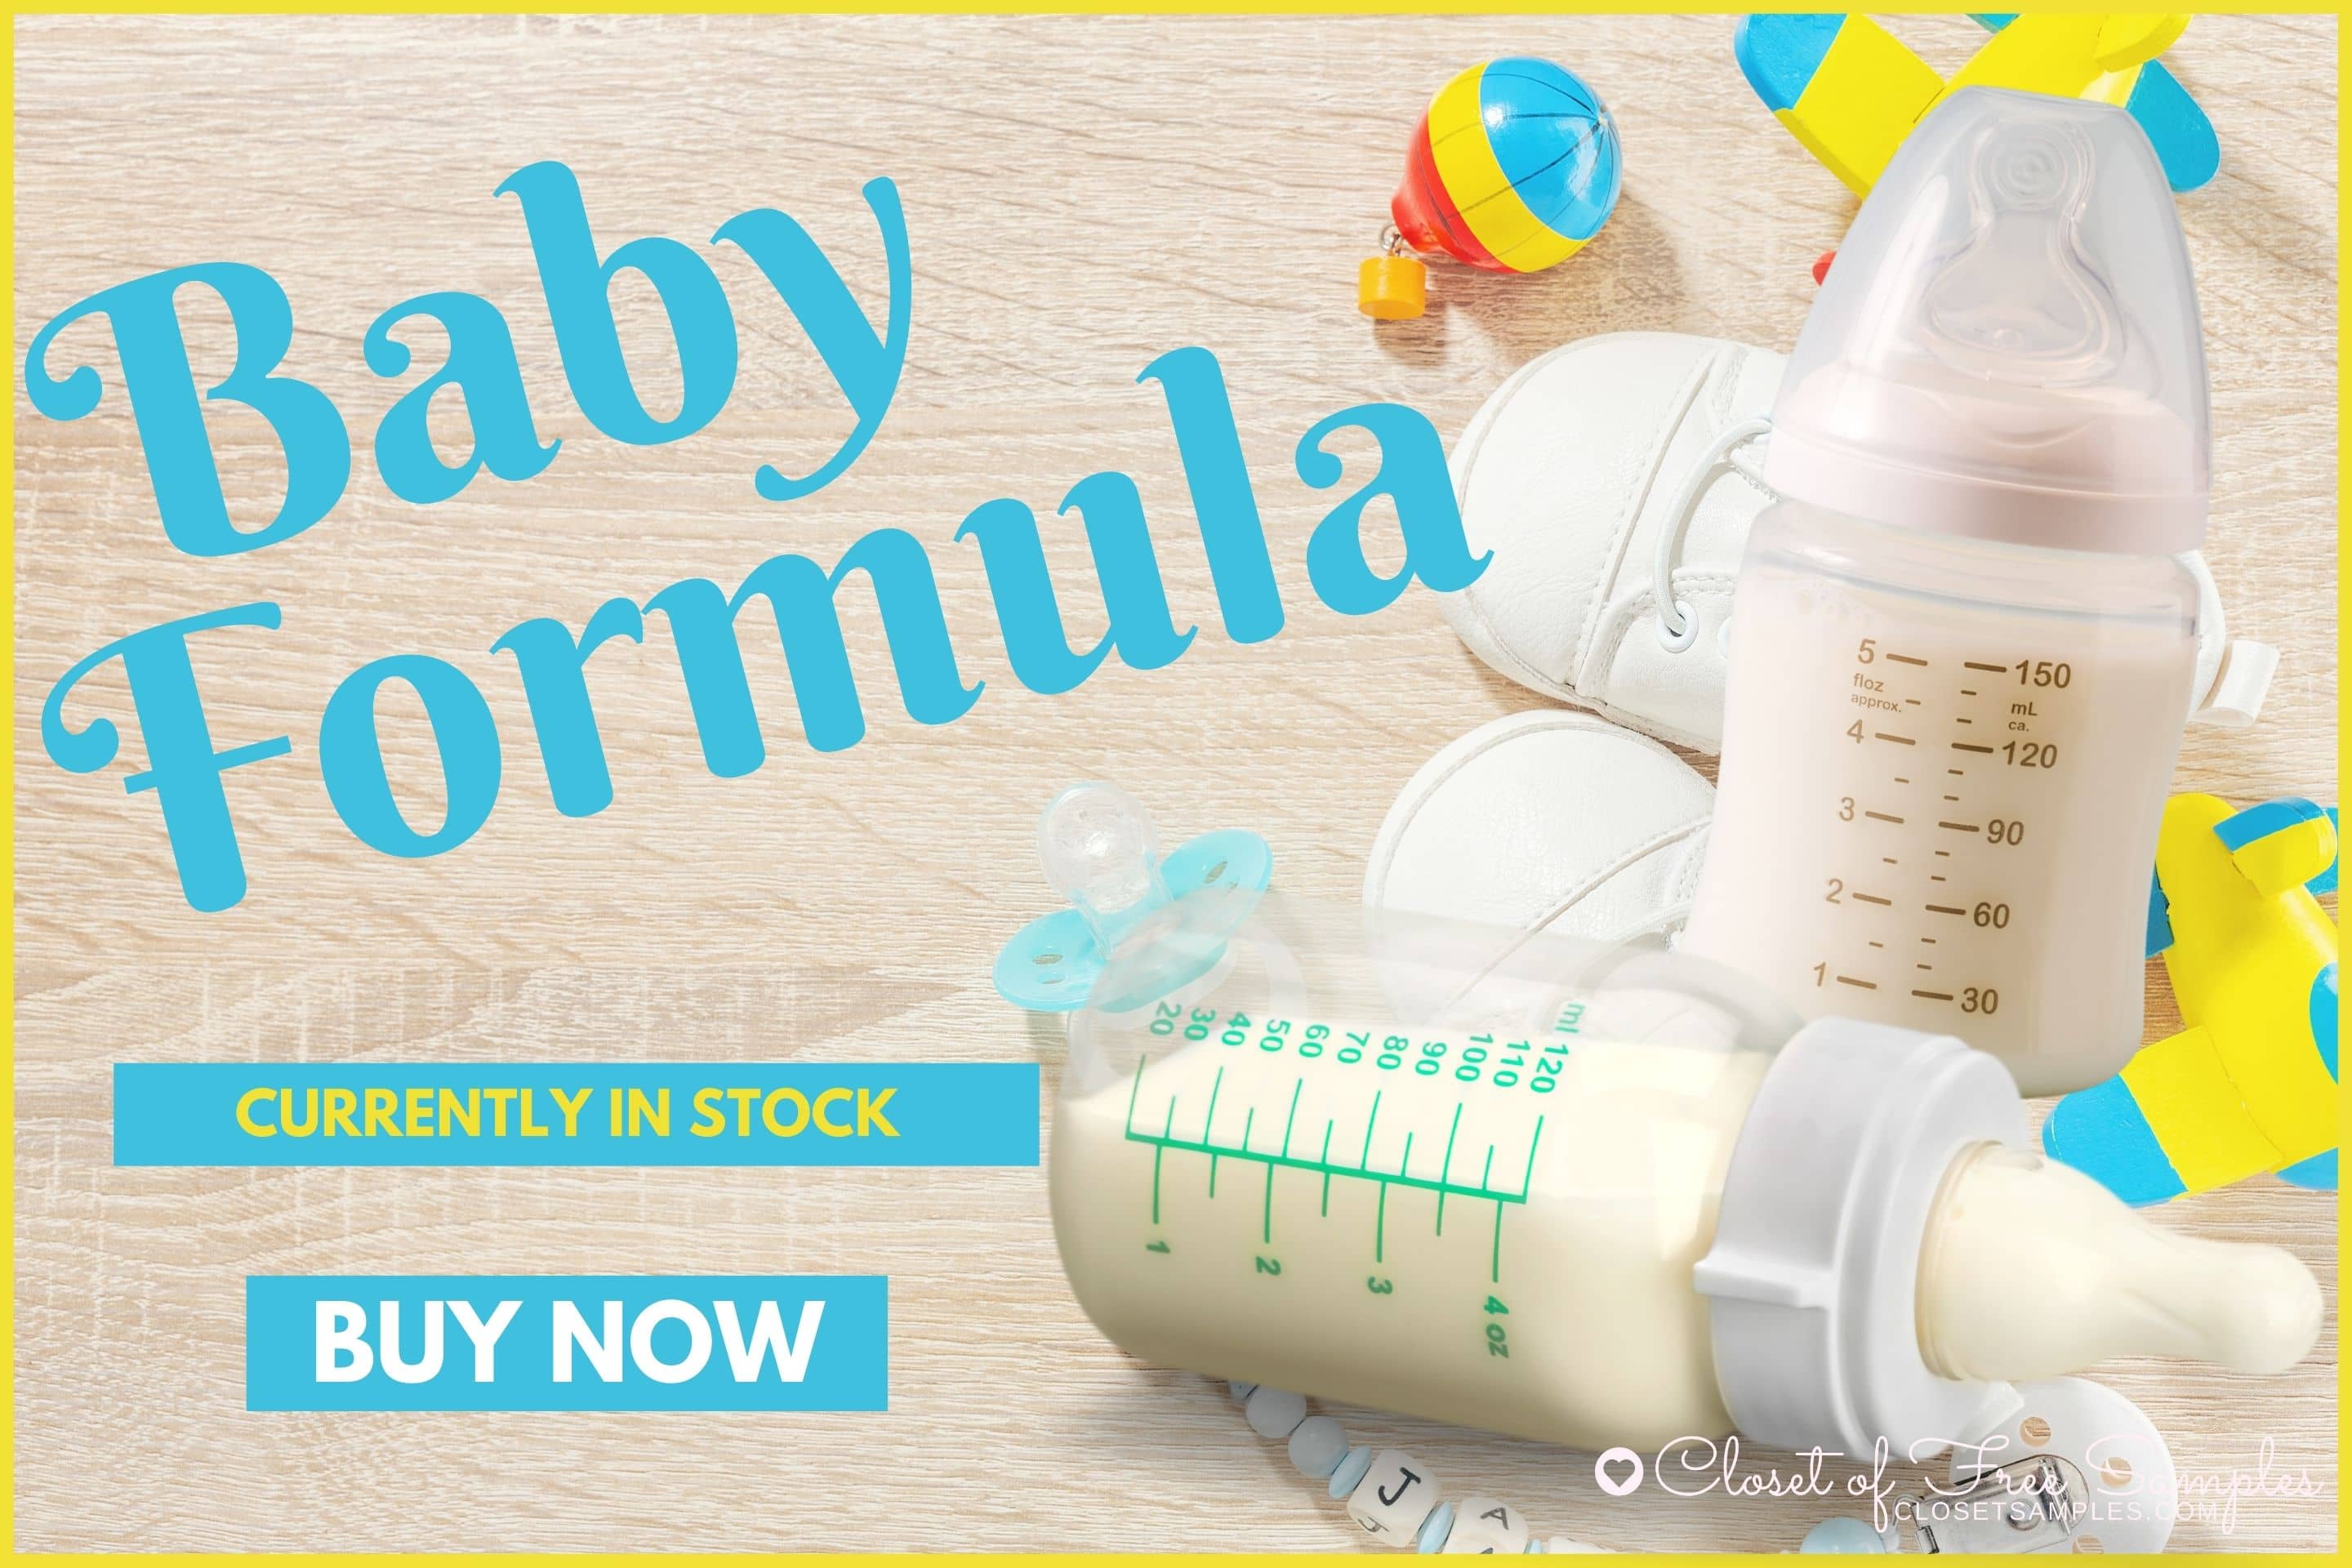 Baby Formula Currently In Stock Online Closetsamples